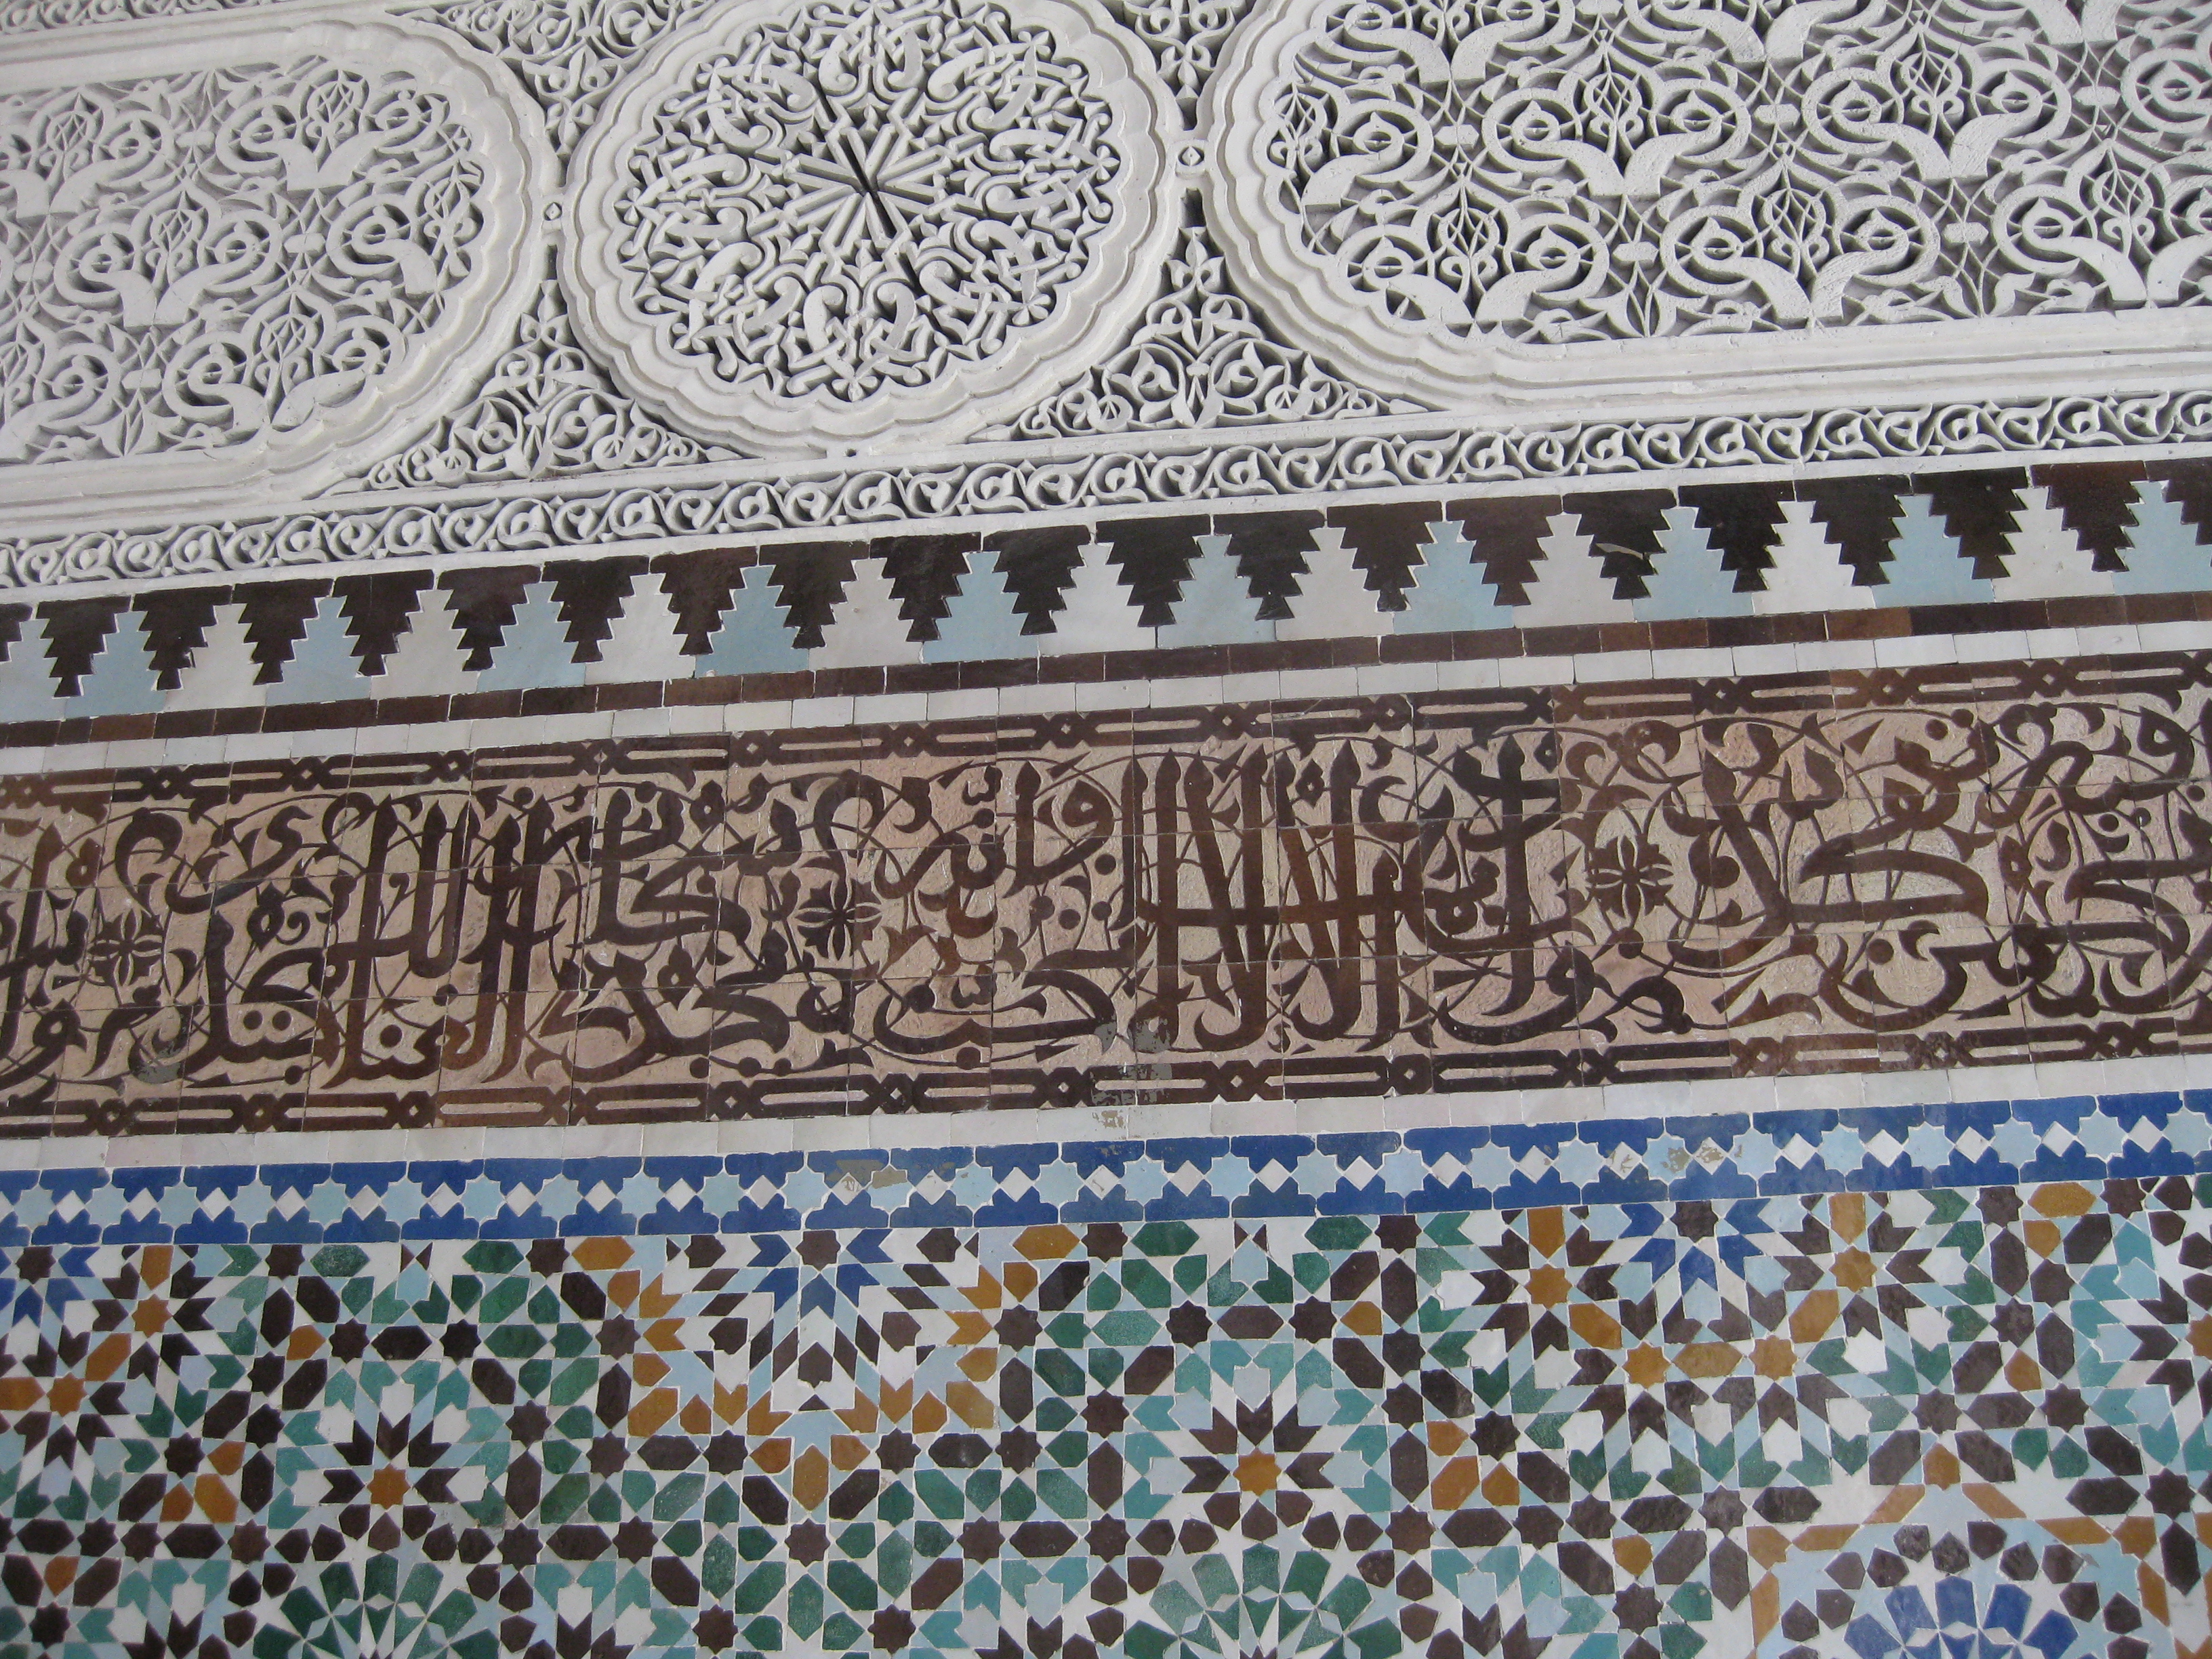 detail of the mosque tiling